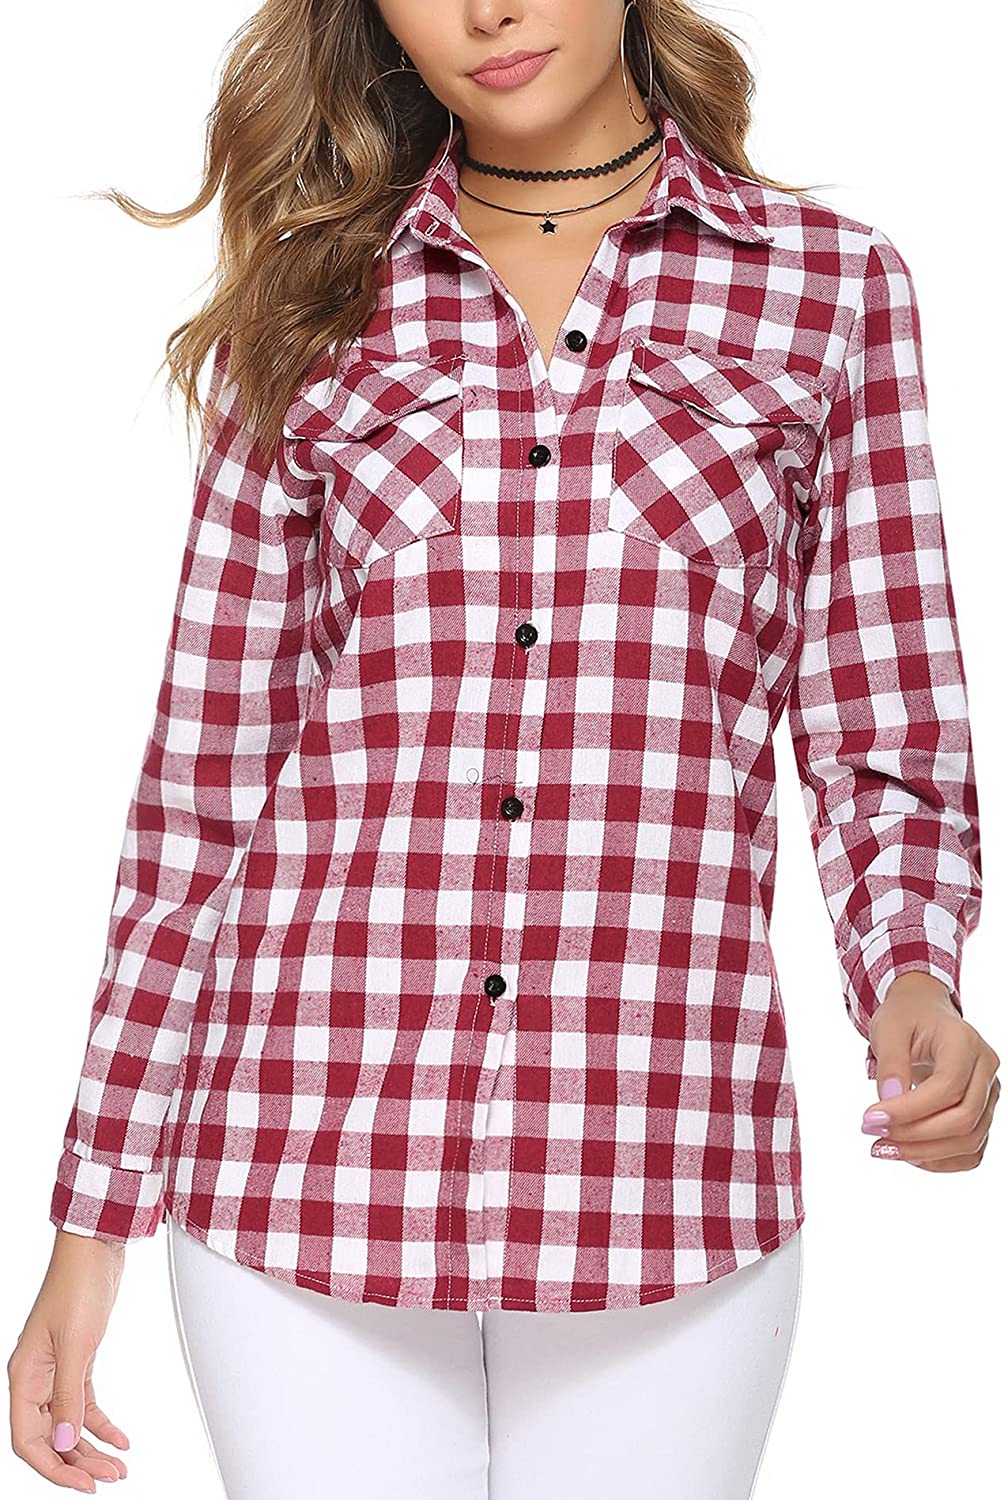 Irevial Womens Plaid Flannel Shirts Casual Long Sleeve Pintucked 